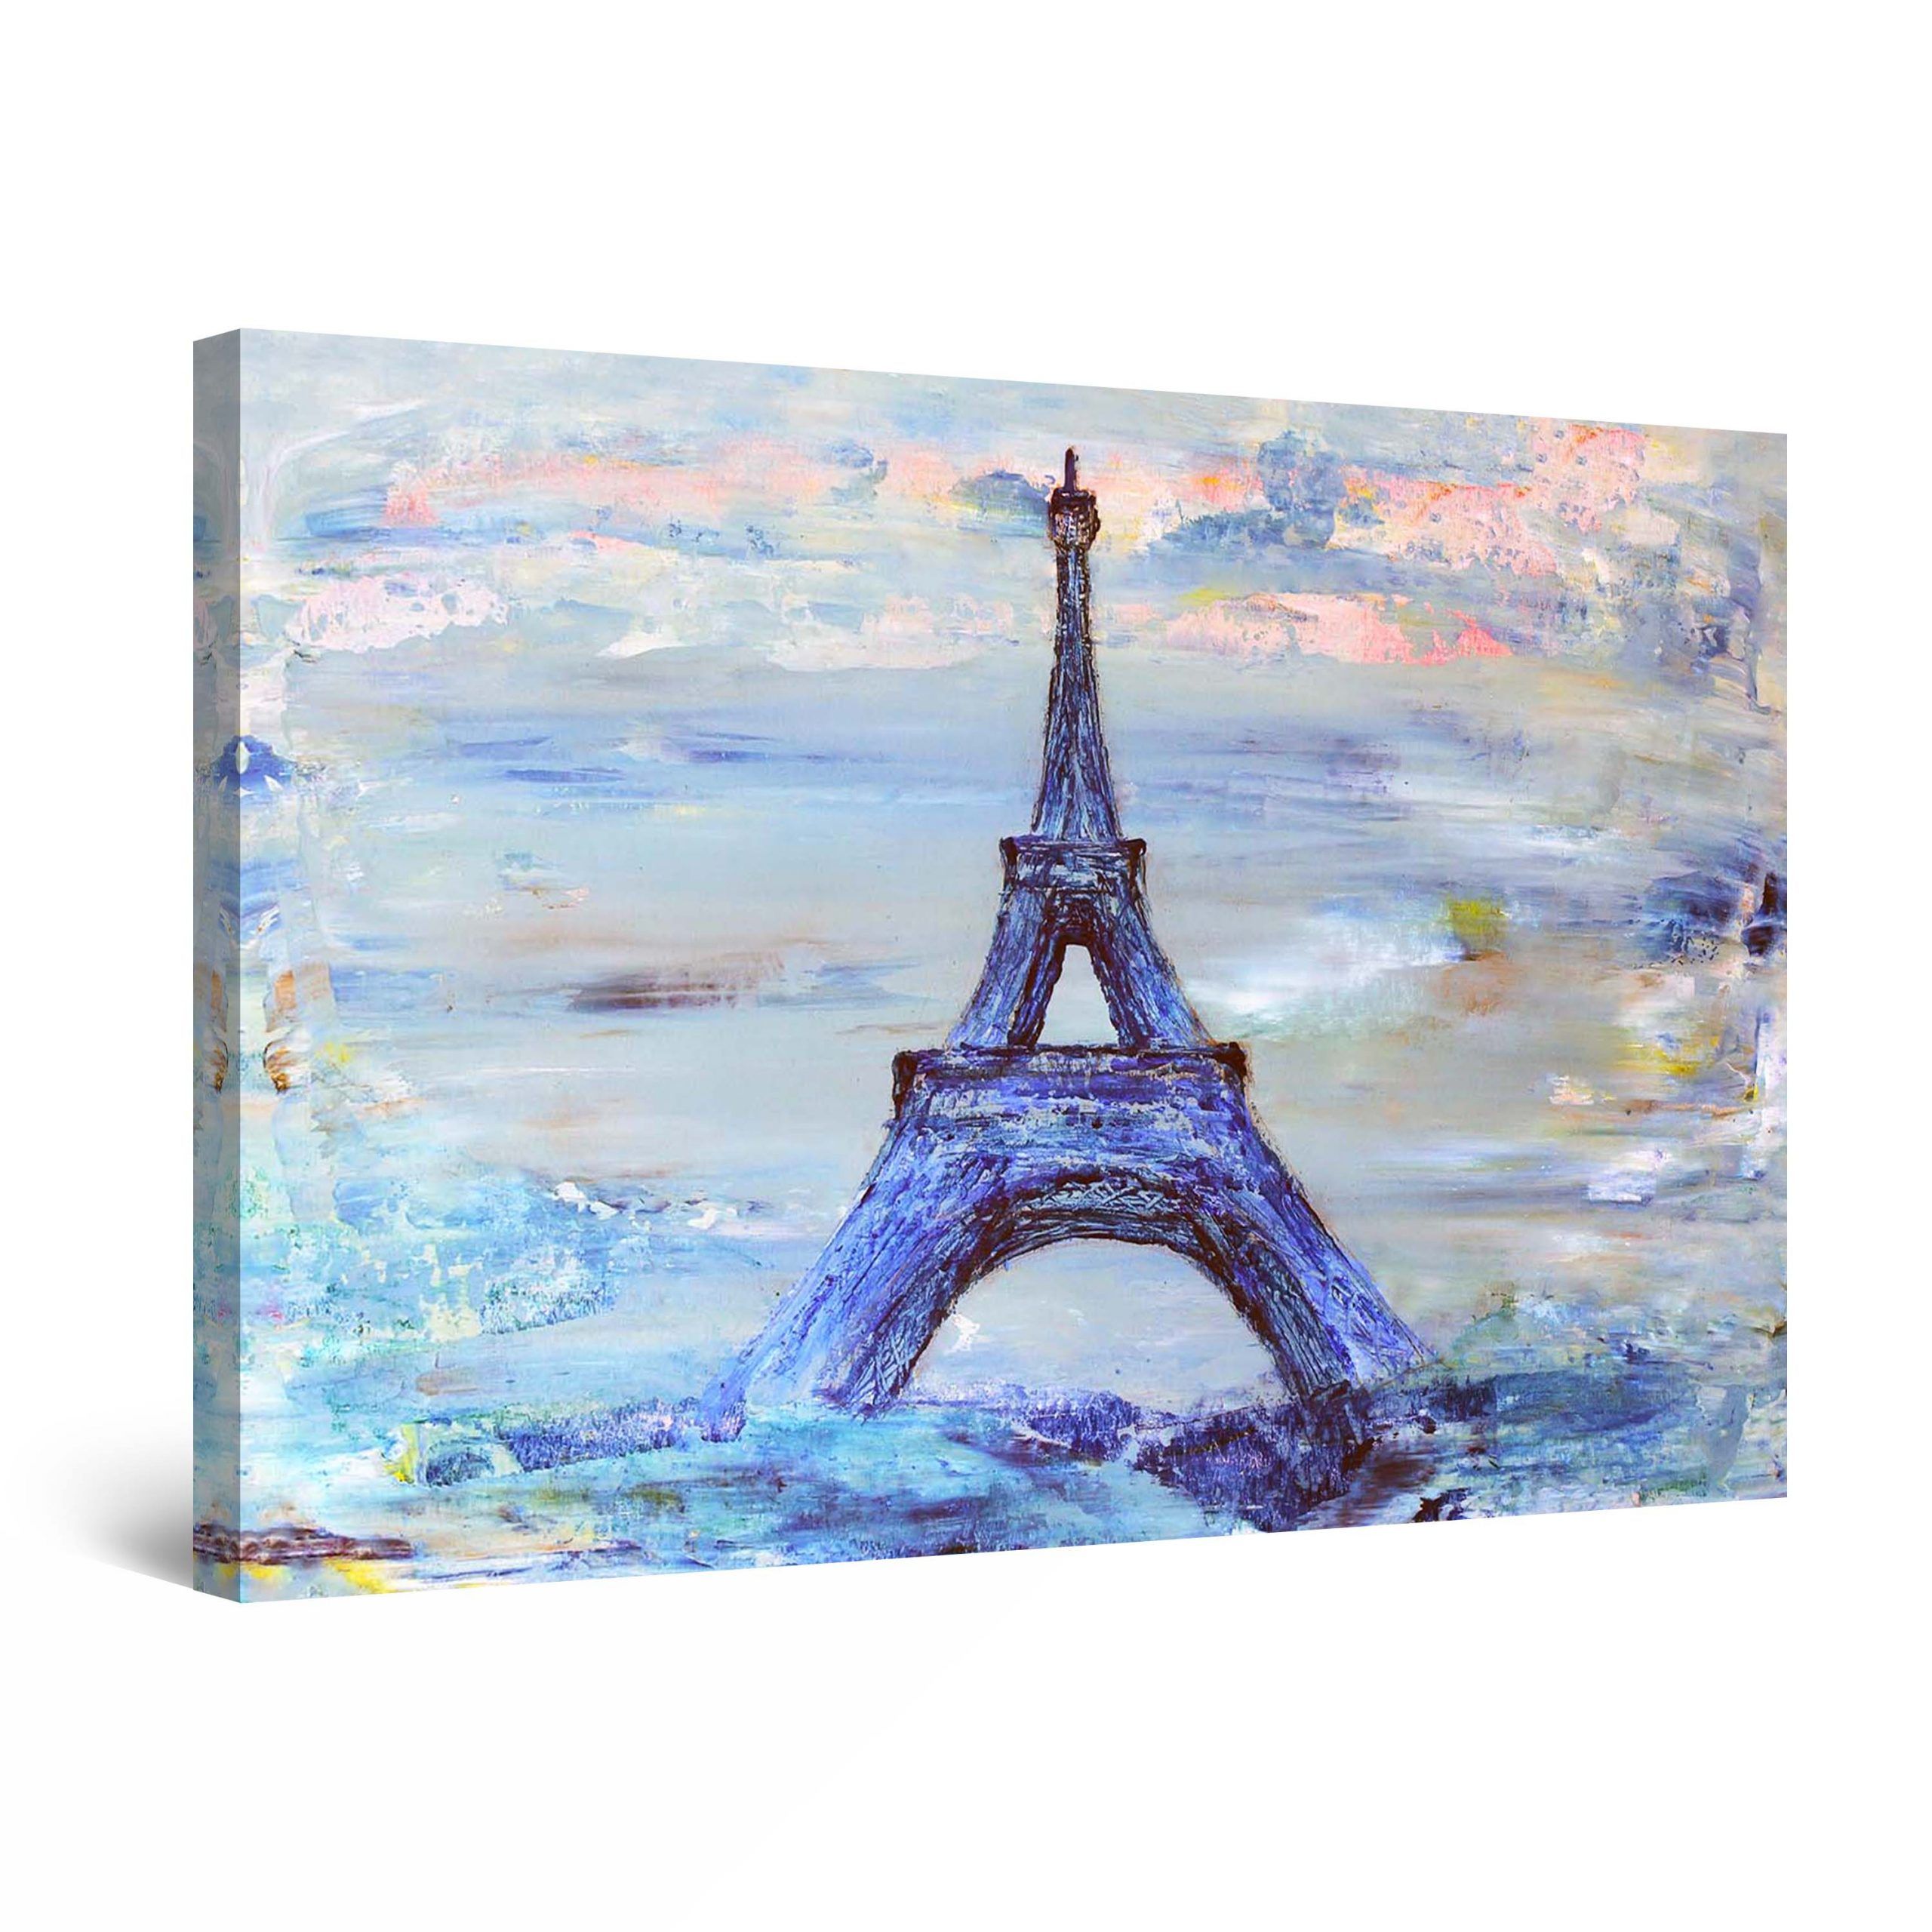 Startonight Canvas Wall Art Blue Eiffel Tower Paris France Theme Intended For Most Recent Tower Wall Art (View 18 of 20)